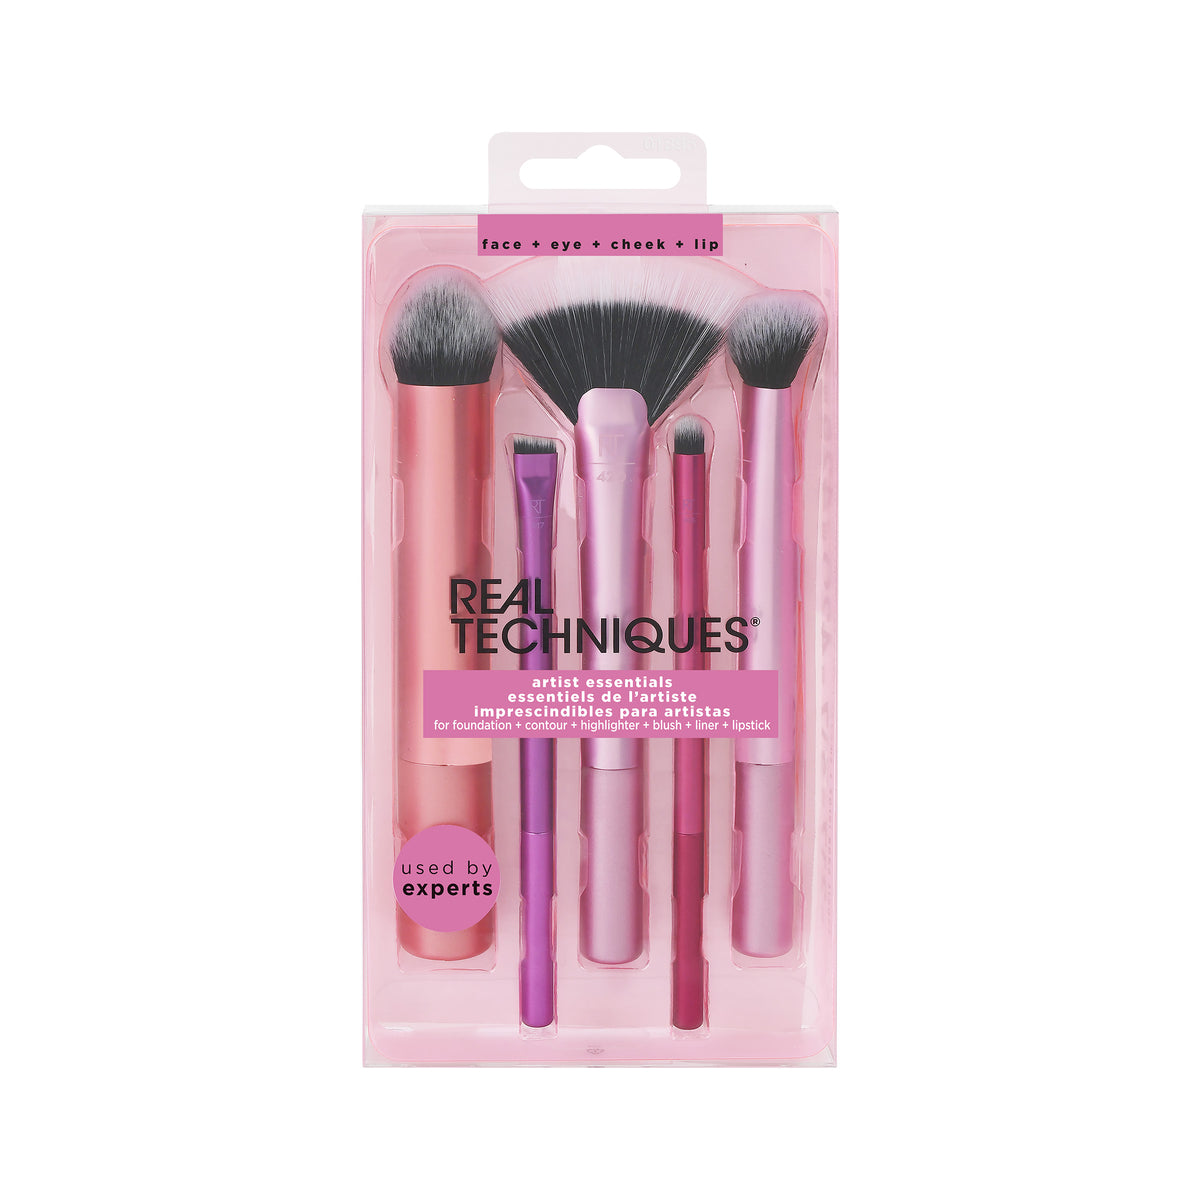 Real Techniques Level Up Brush And Sponge Kit, Makeup Brushes For